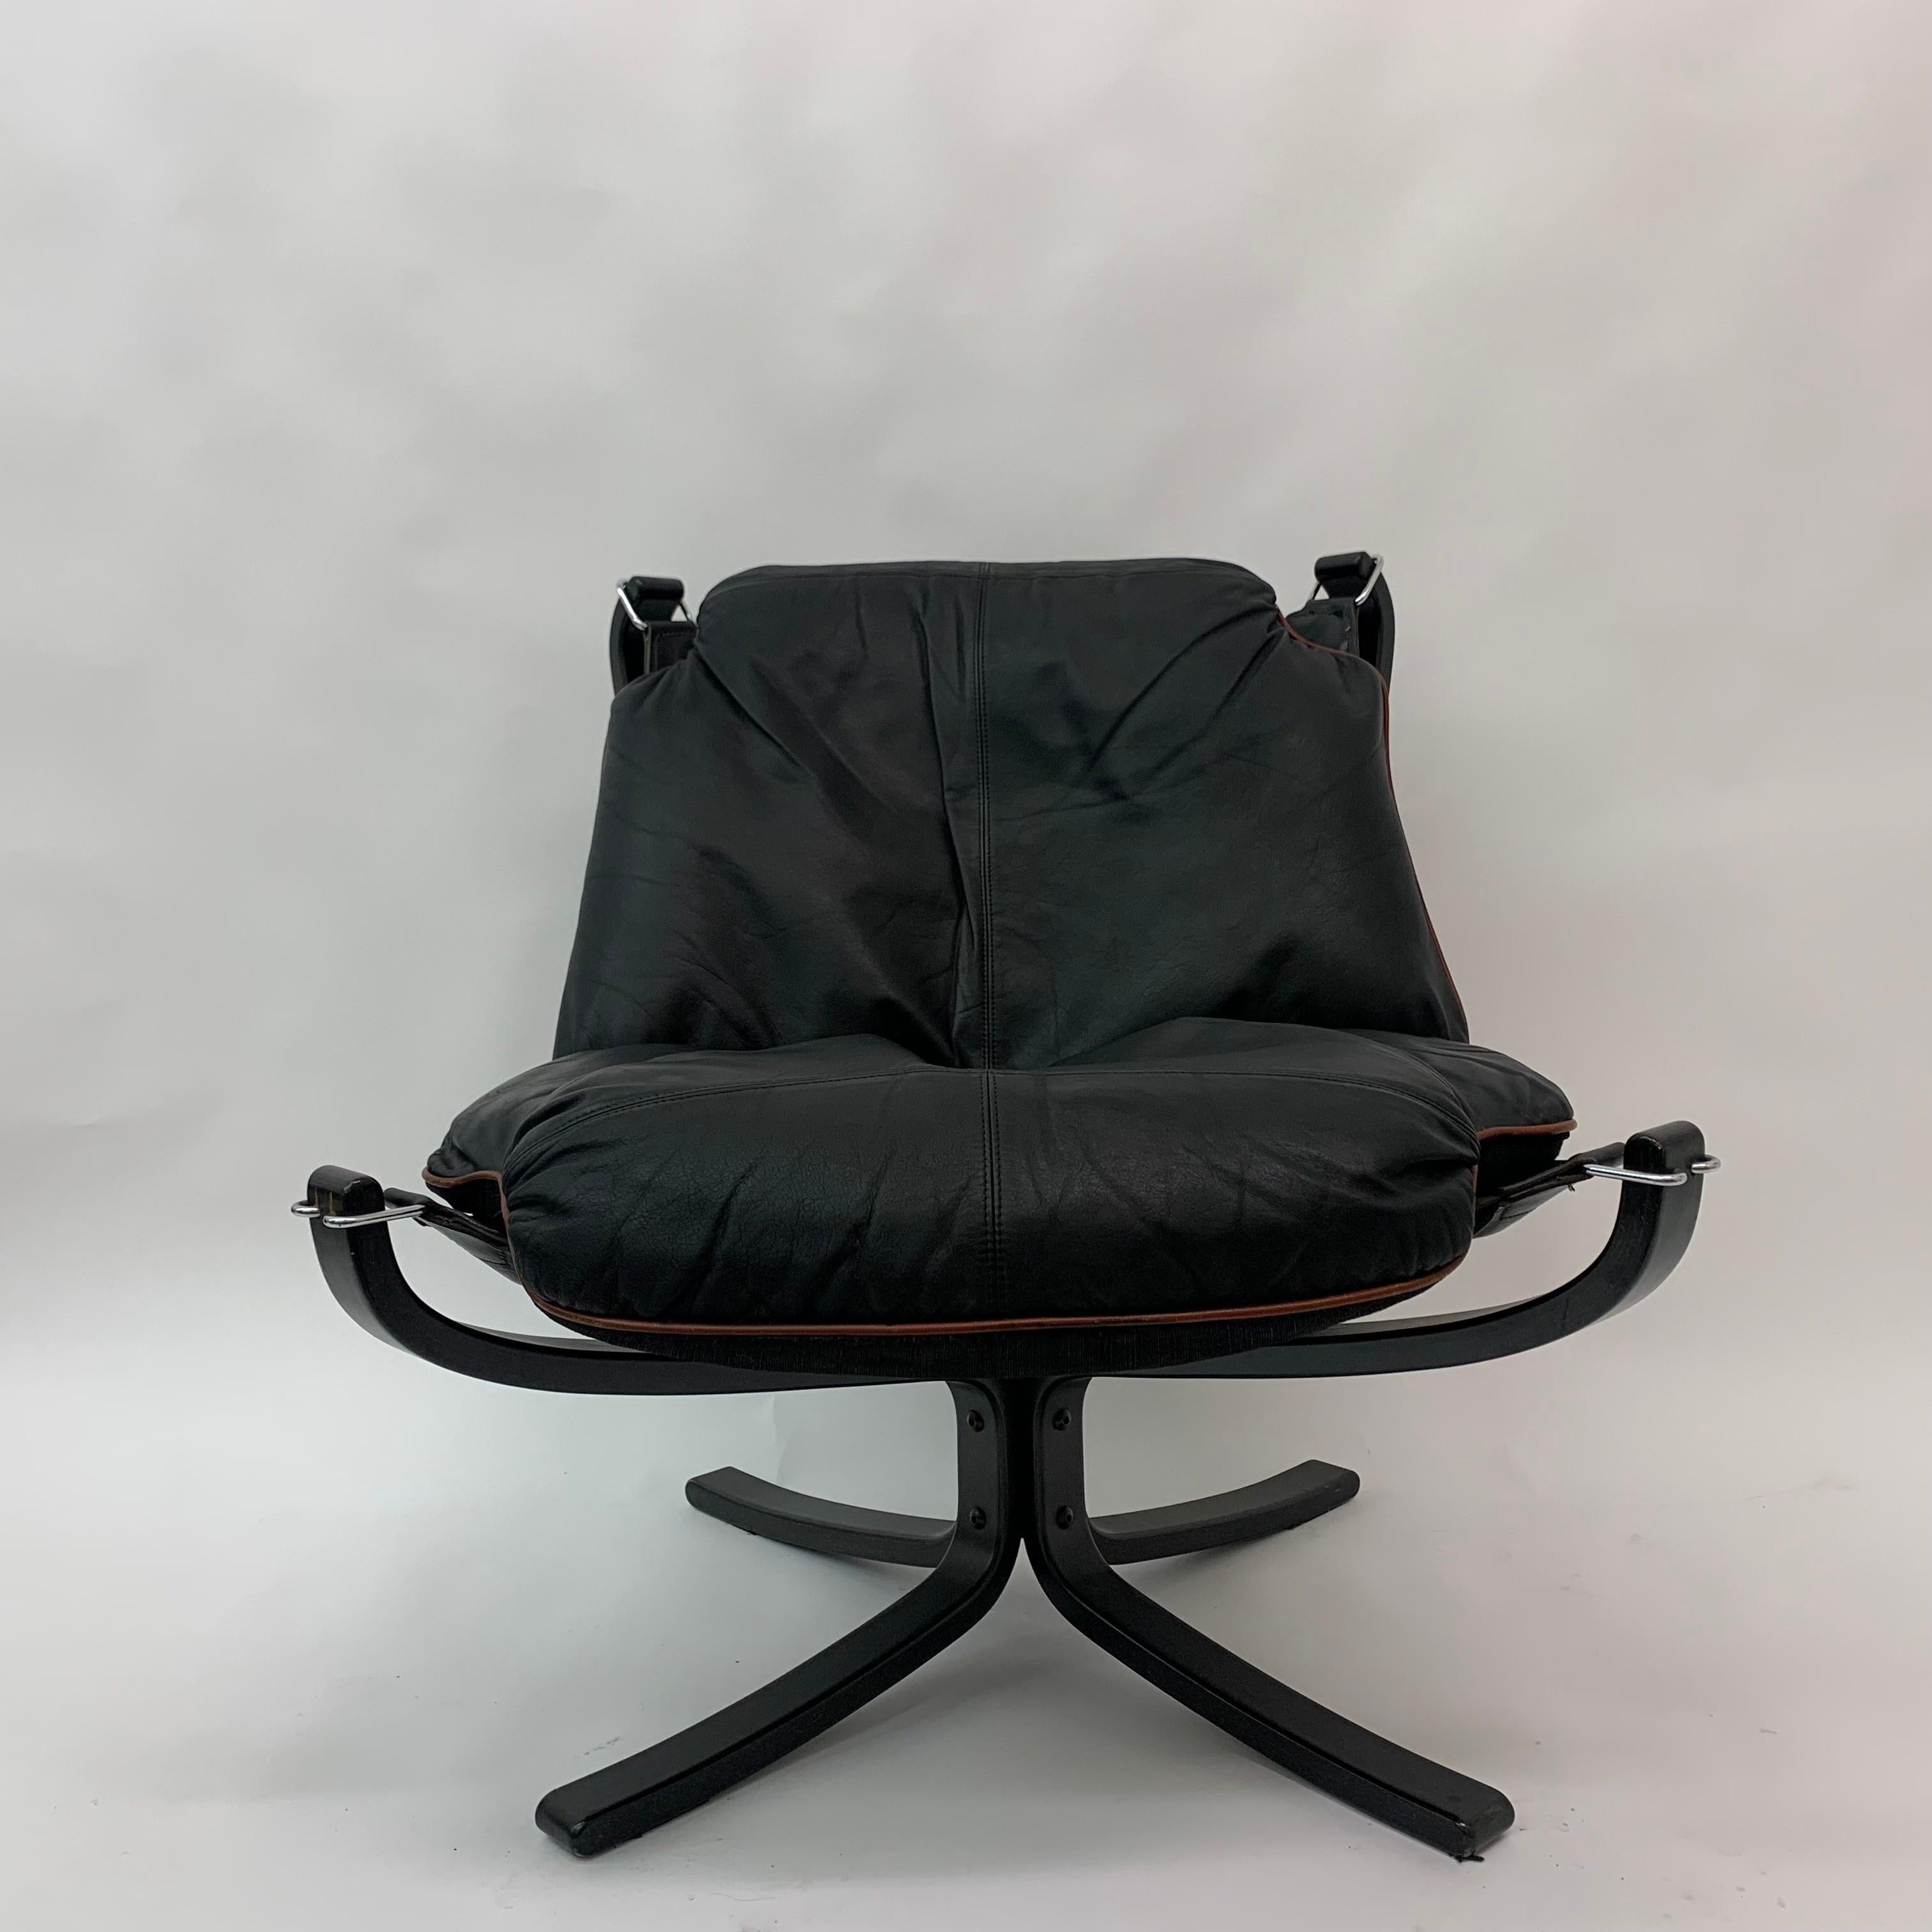 Falcon leather Lounge chair by Sigurd Ressel for Vatne Møbler, 1970s.